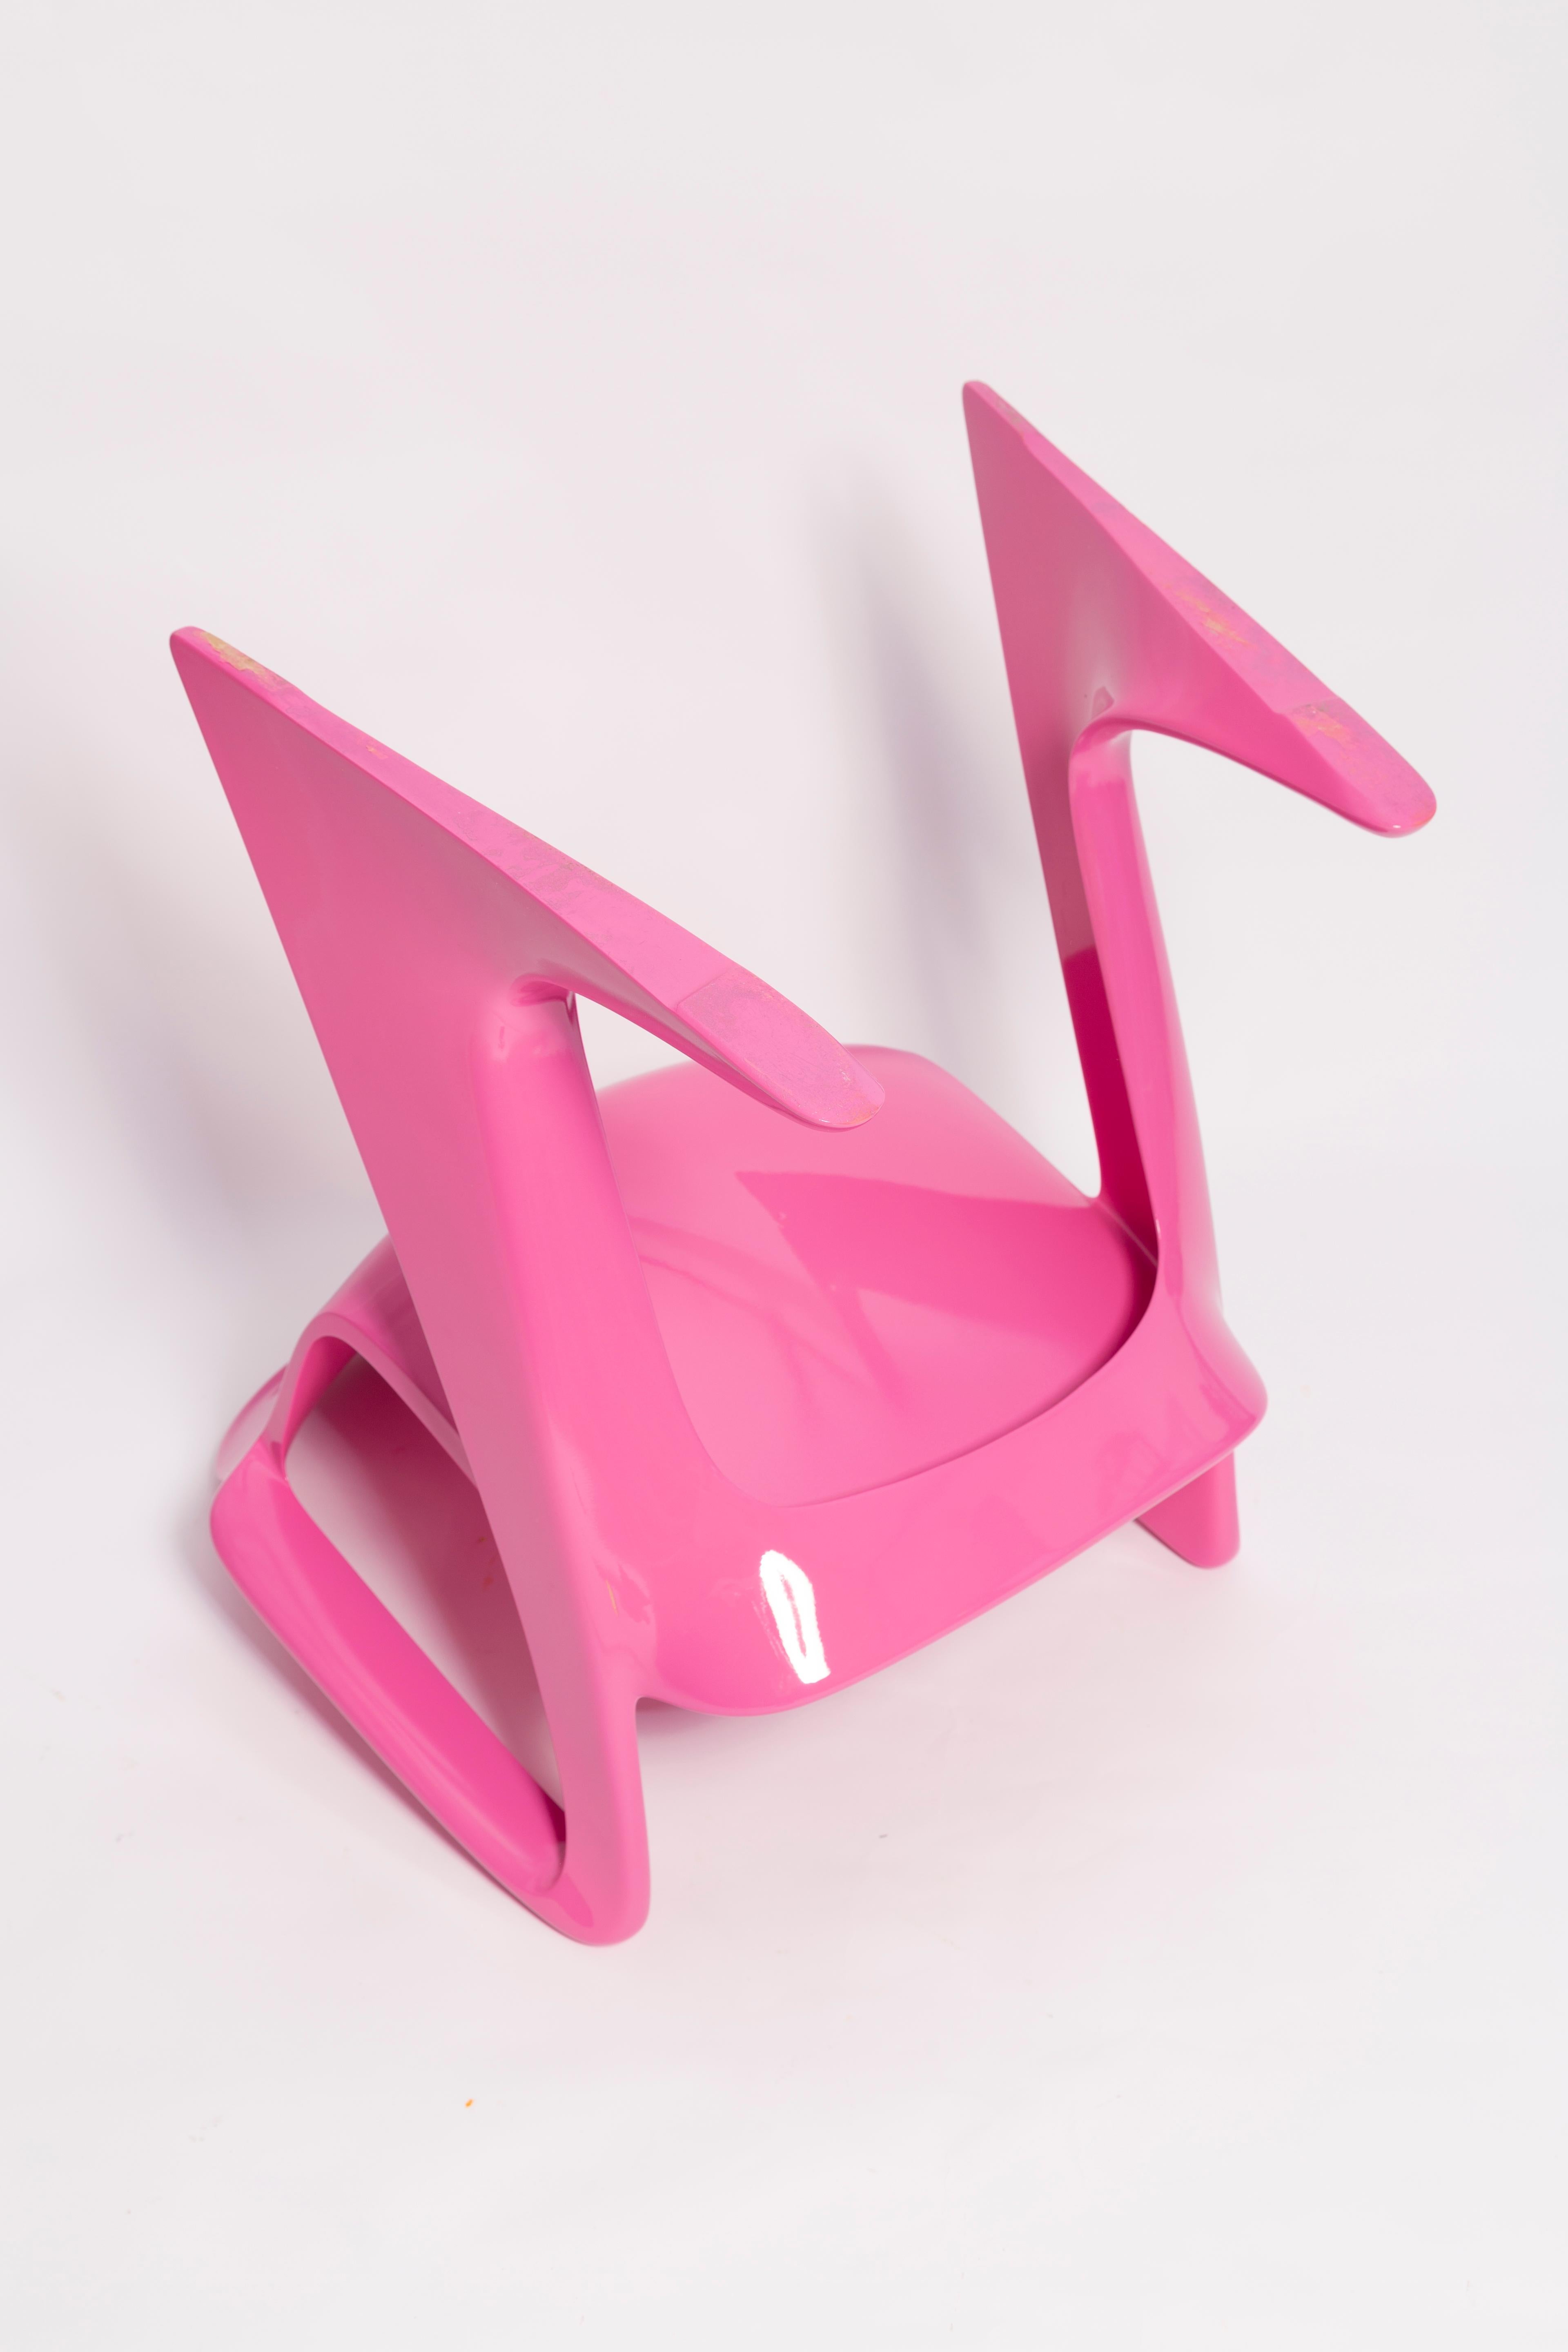 Mid Century Pink Kangaroo Chair Designed by Ernst Moeckl, Germany, 1968 For Sale 5